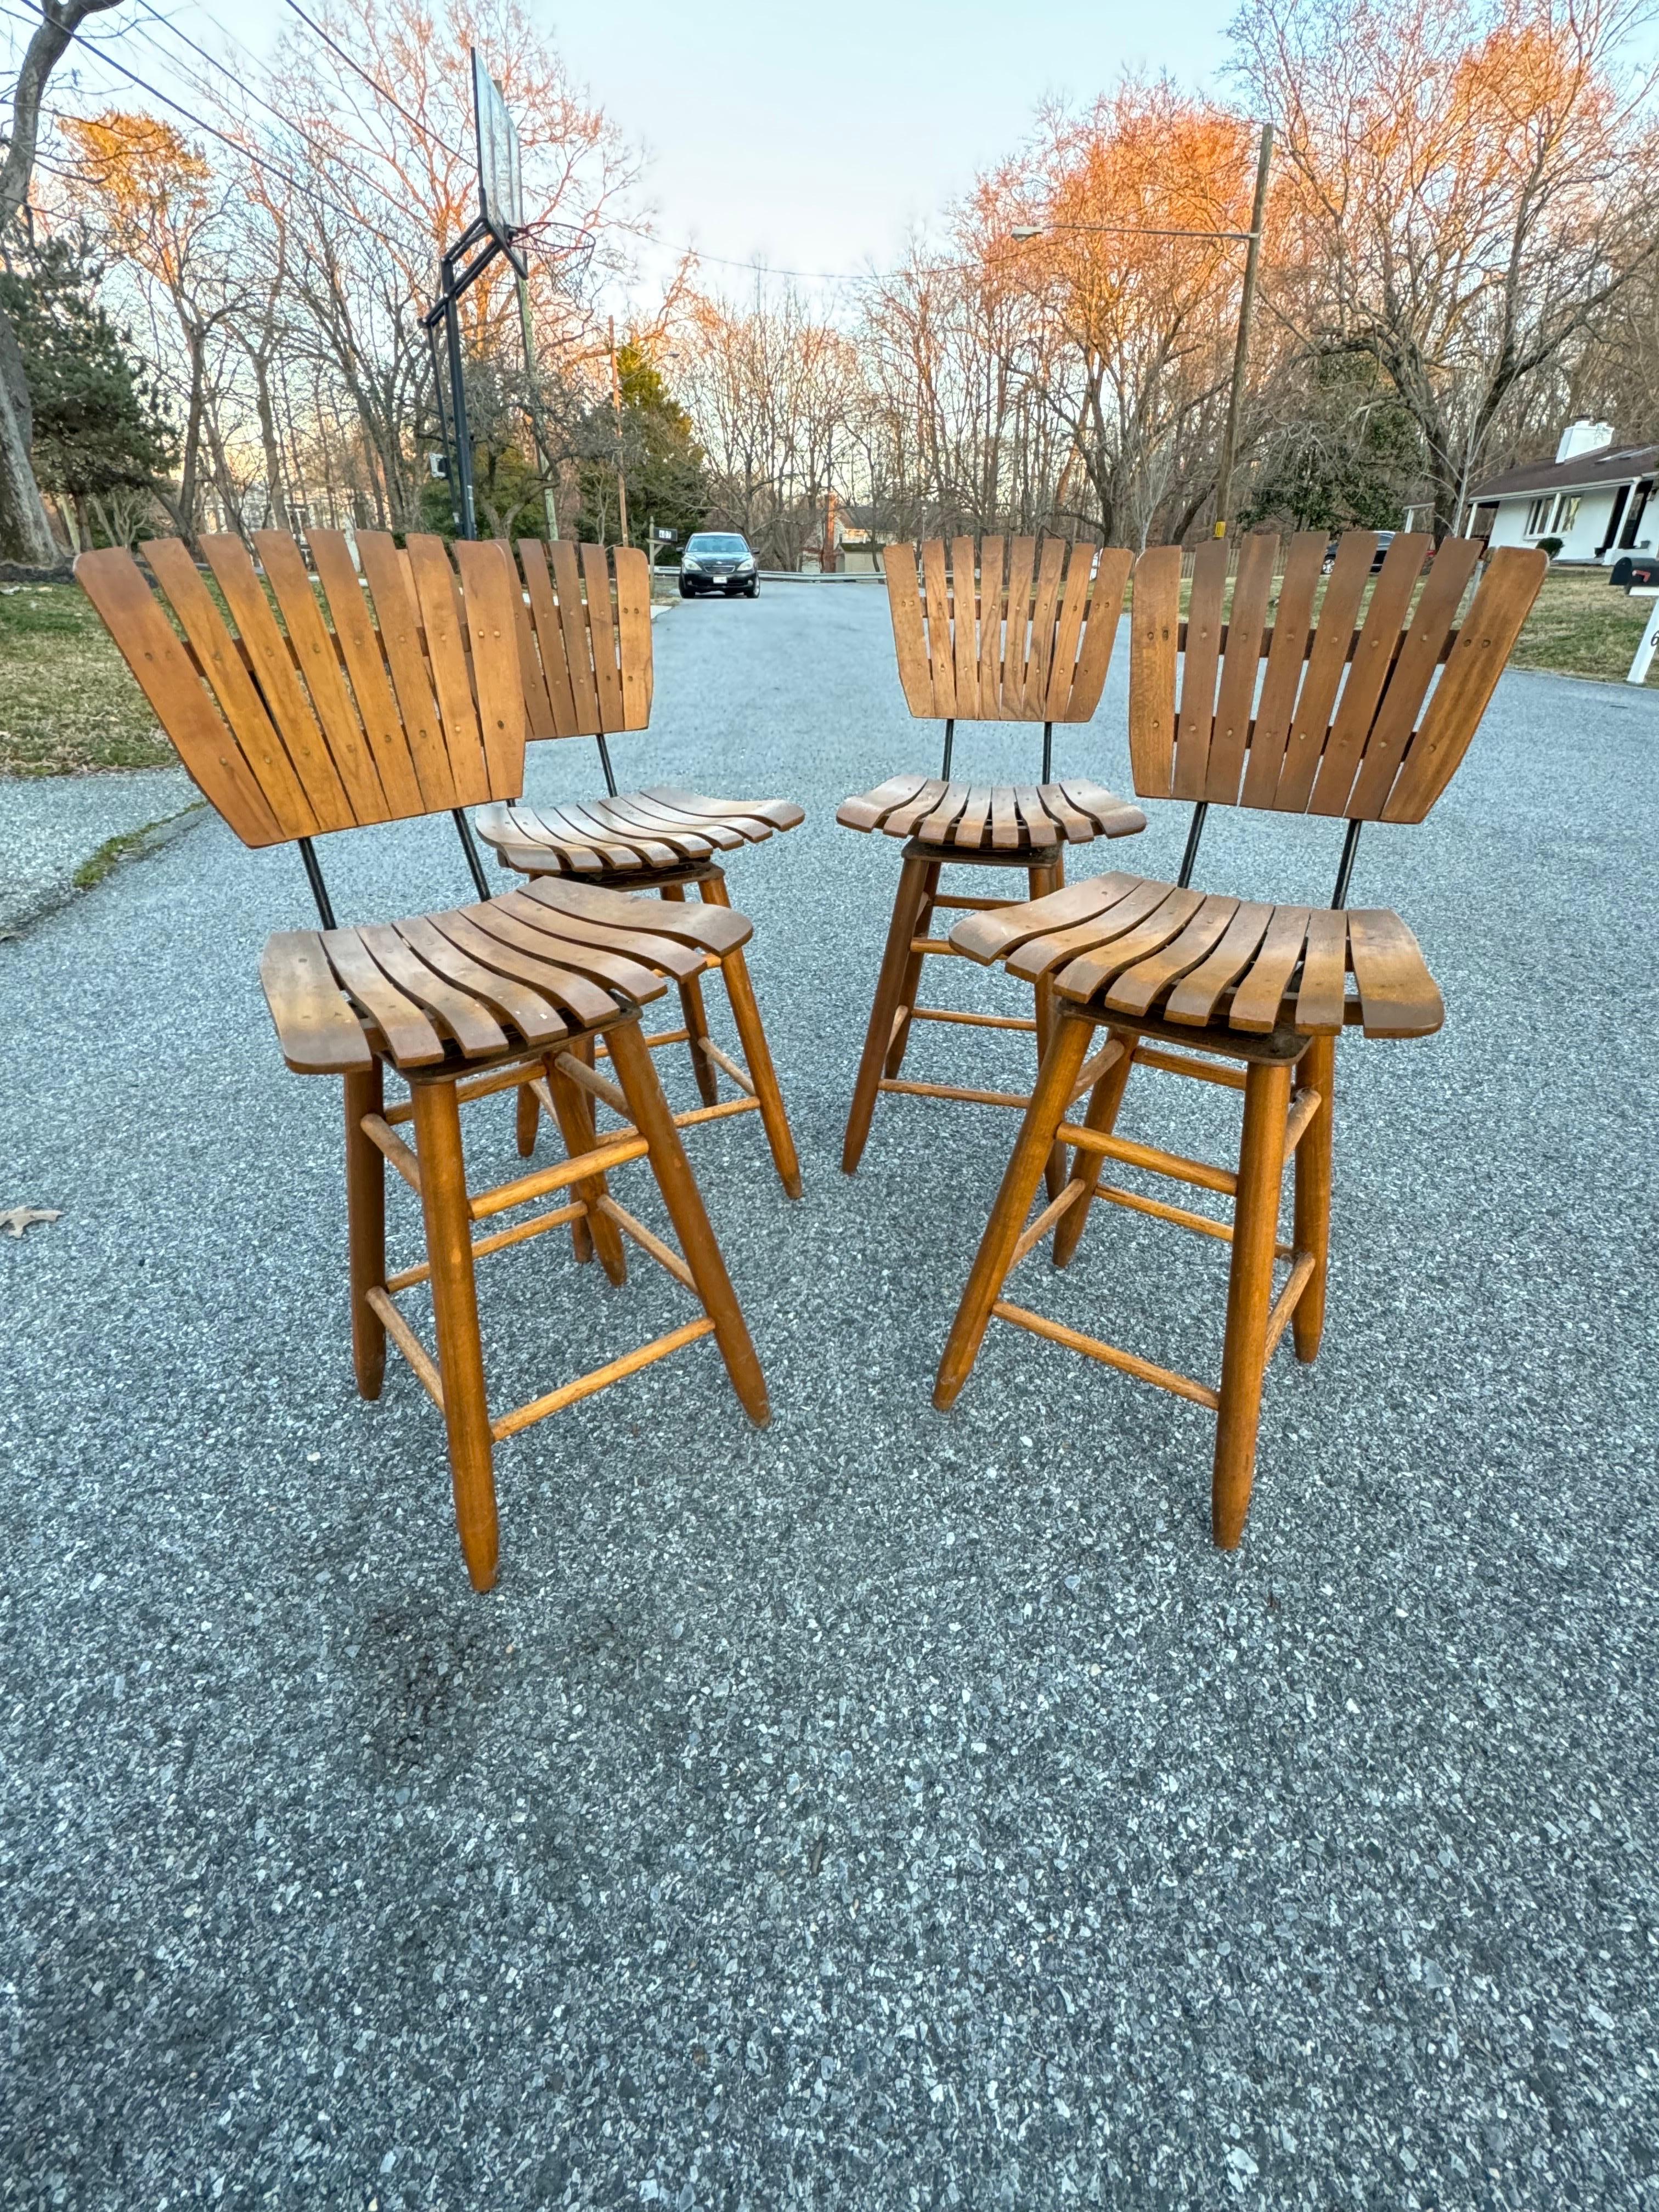 These bar stools are indeed a fine example of mid-century modern design, often attributed to Arthur Umanoff. Their maple construction and the ability to swivel add to their functionality and appeal.Their minimal wear indicates that they have